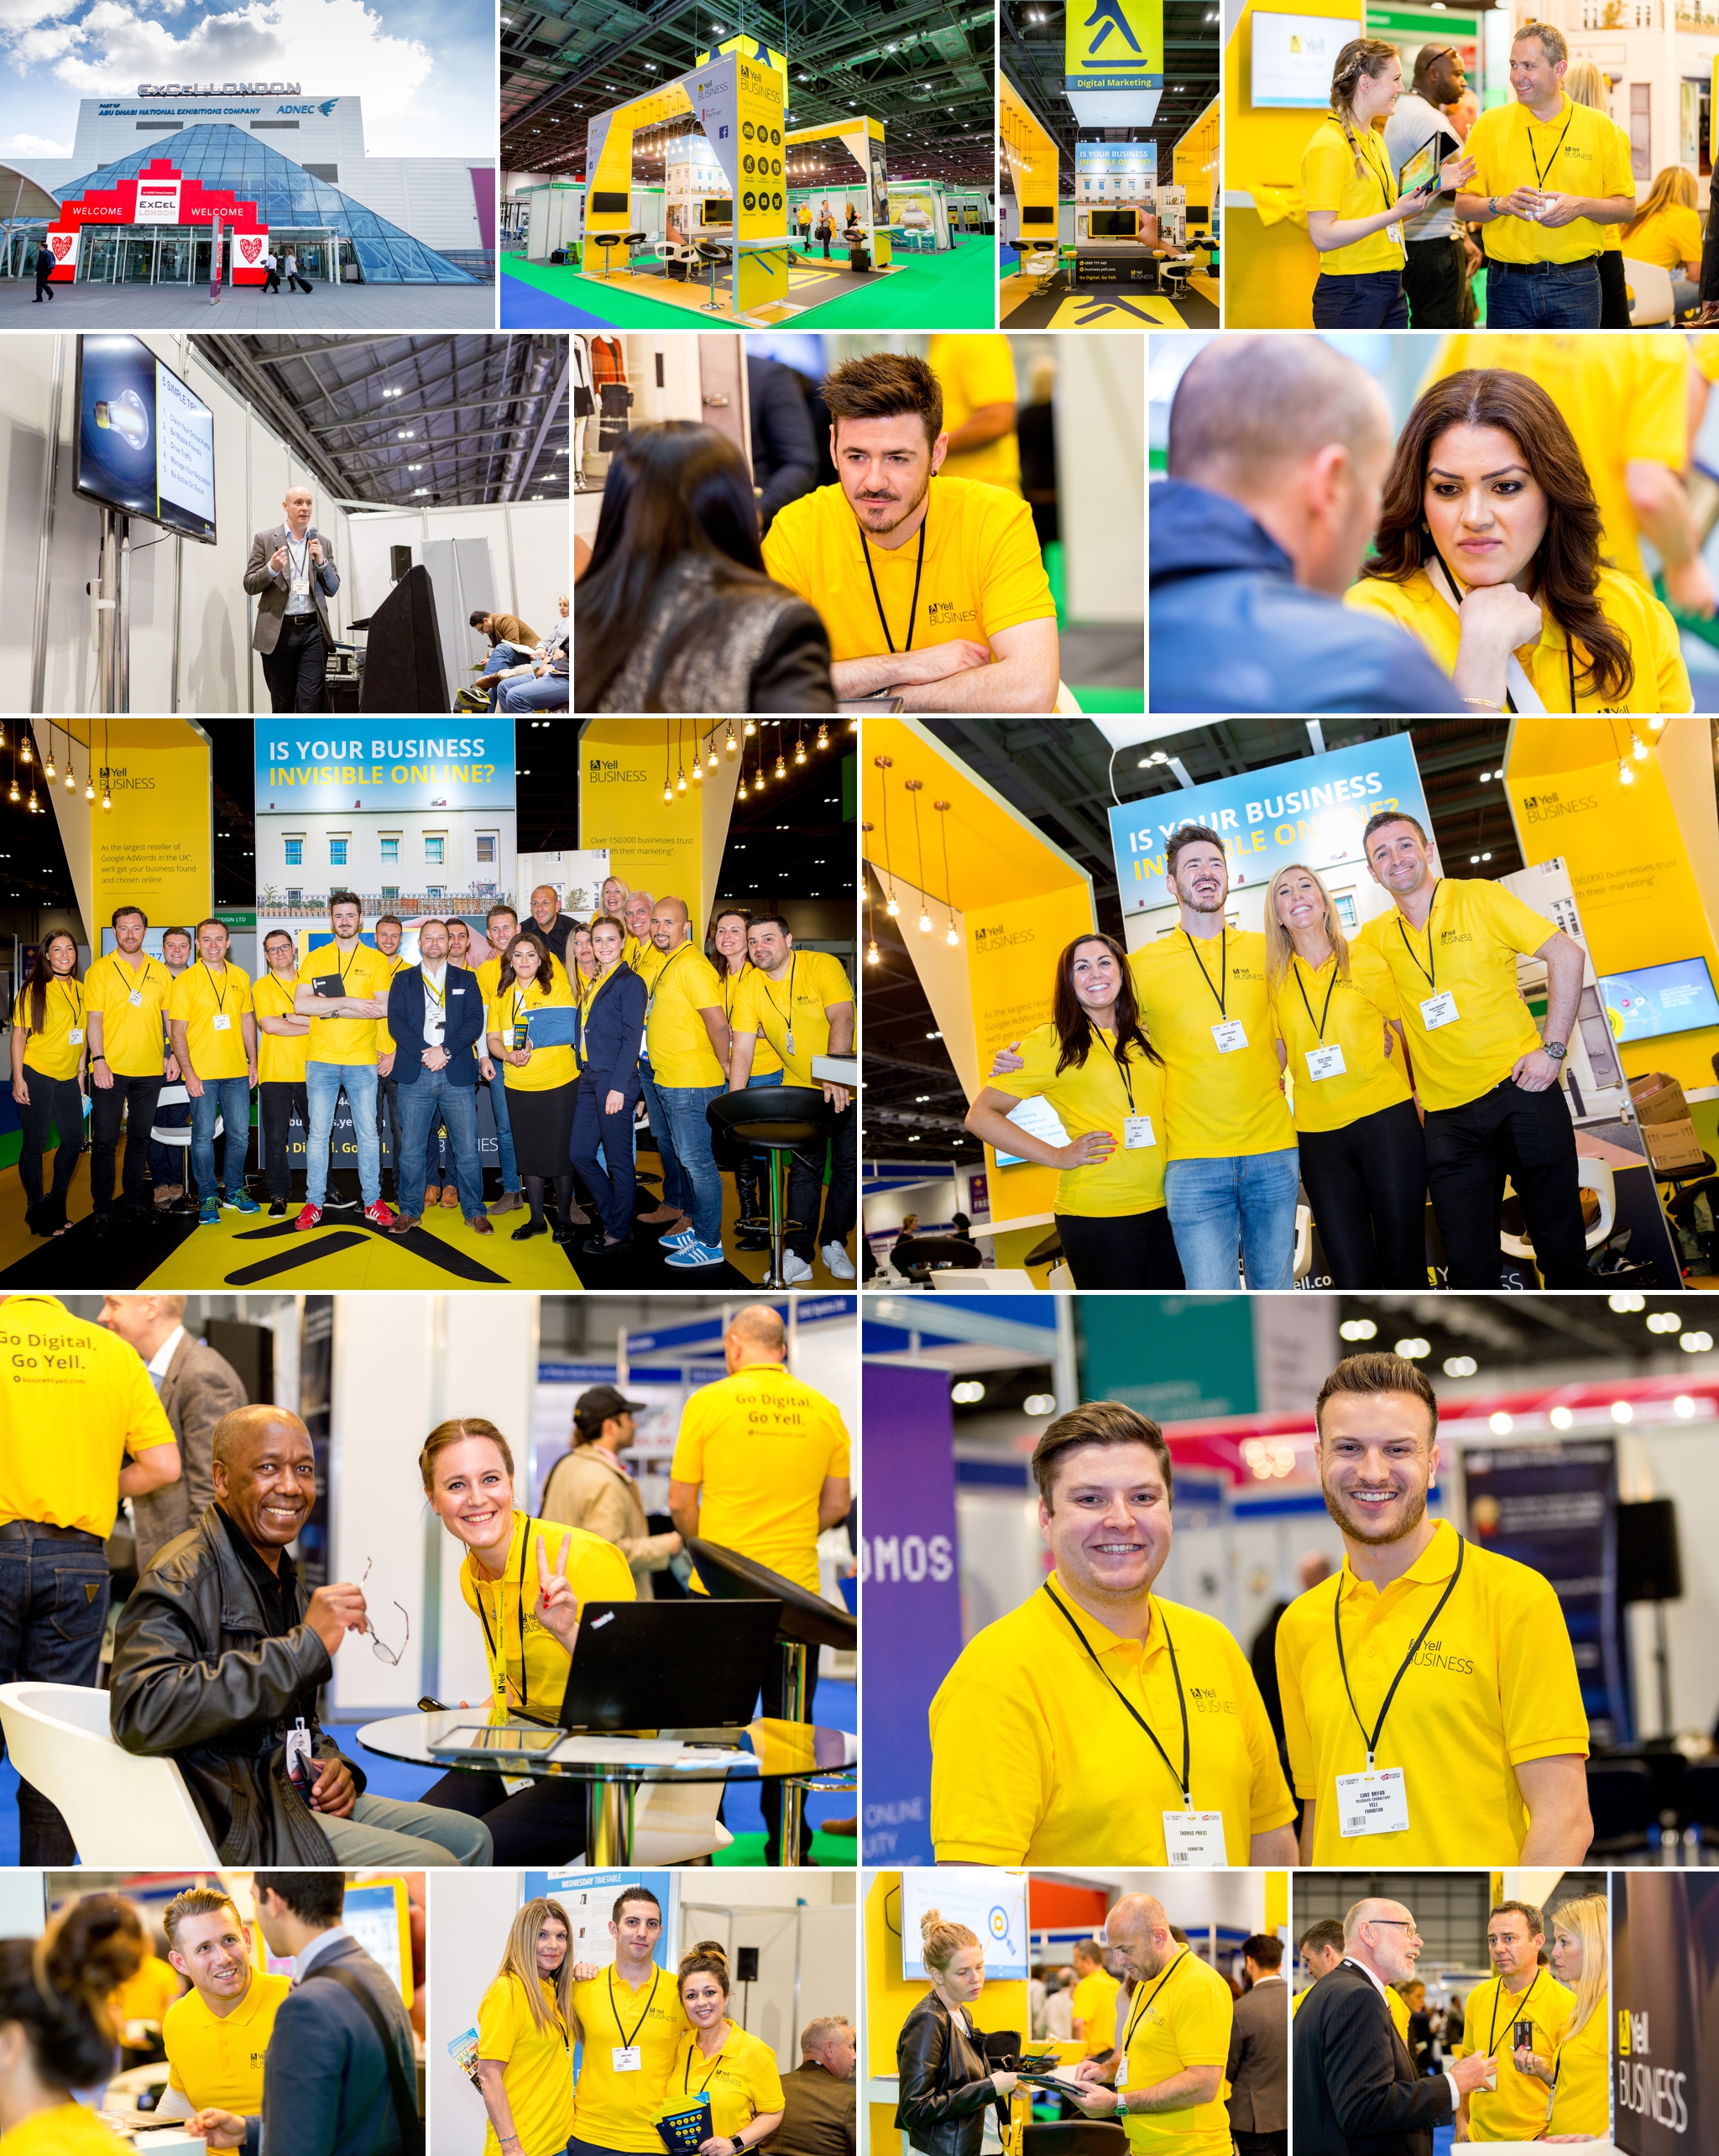 TBS 2017 - Business Show Excel London